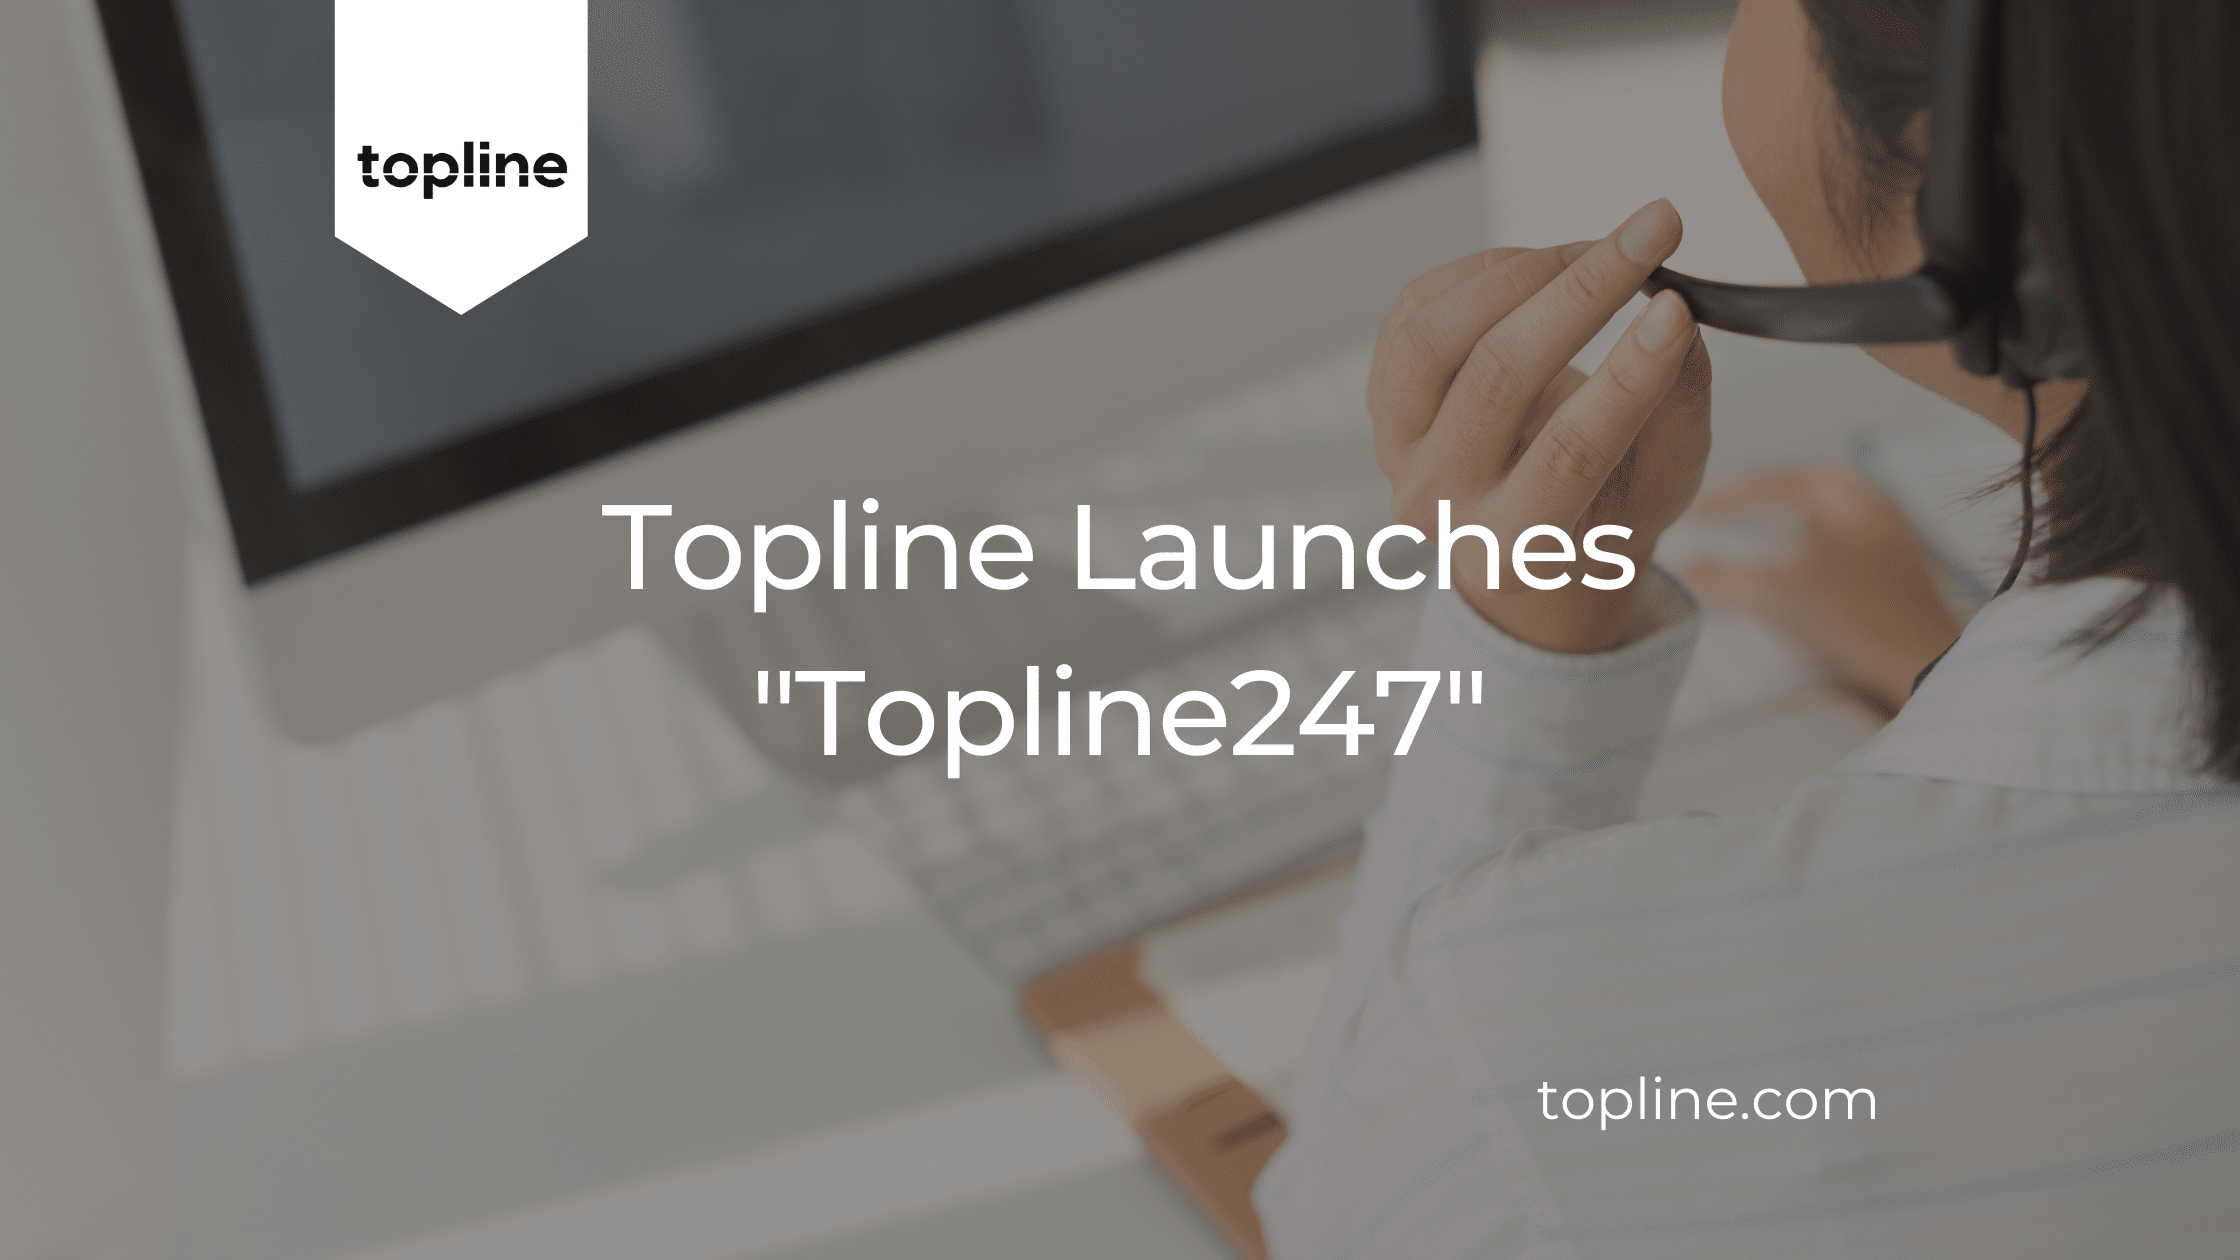 Topline Launches “Topline 247”: A Game-Changing, Real-Time Response Service for Enhanced Customer Engagement